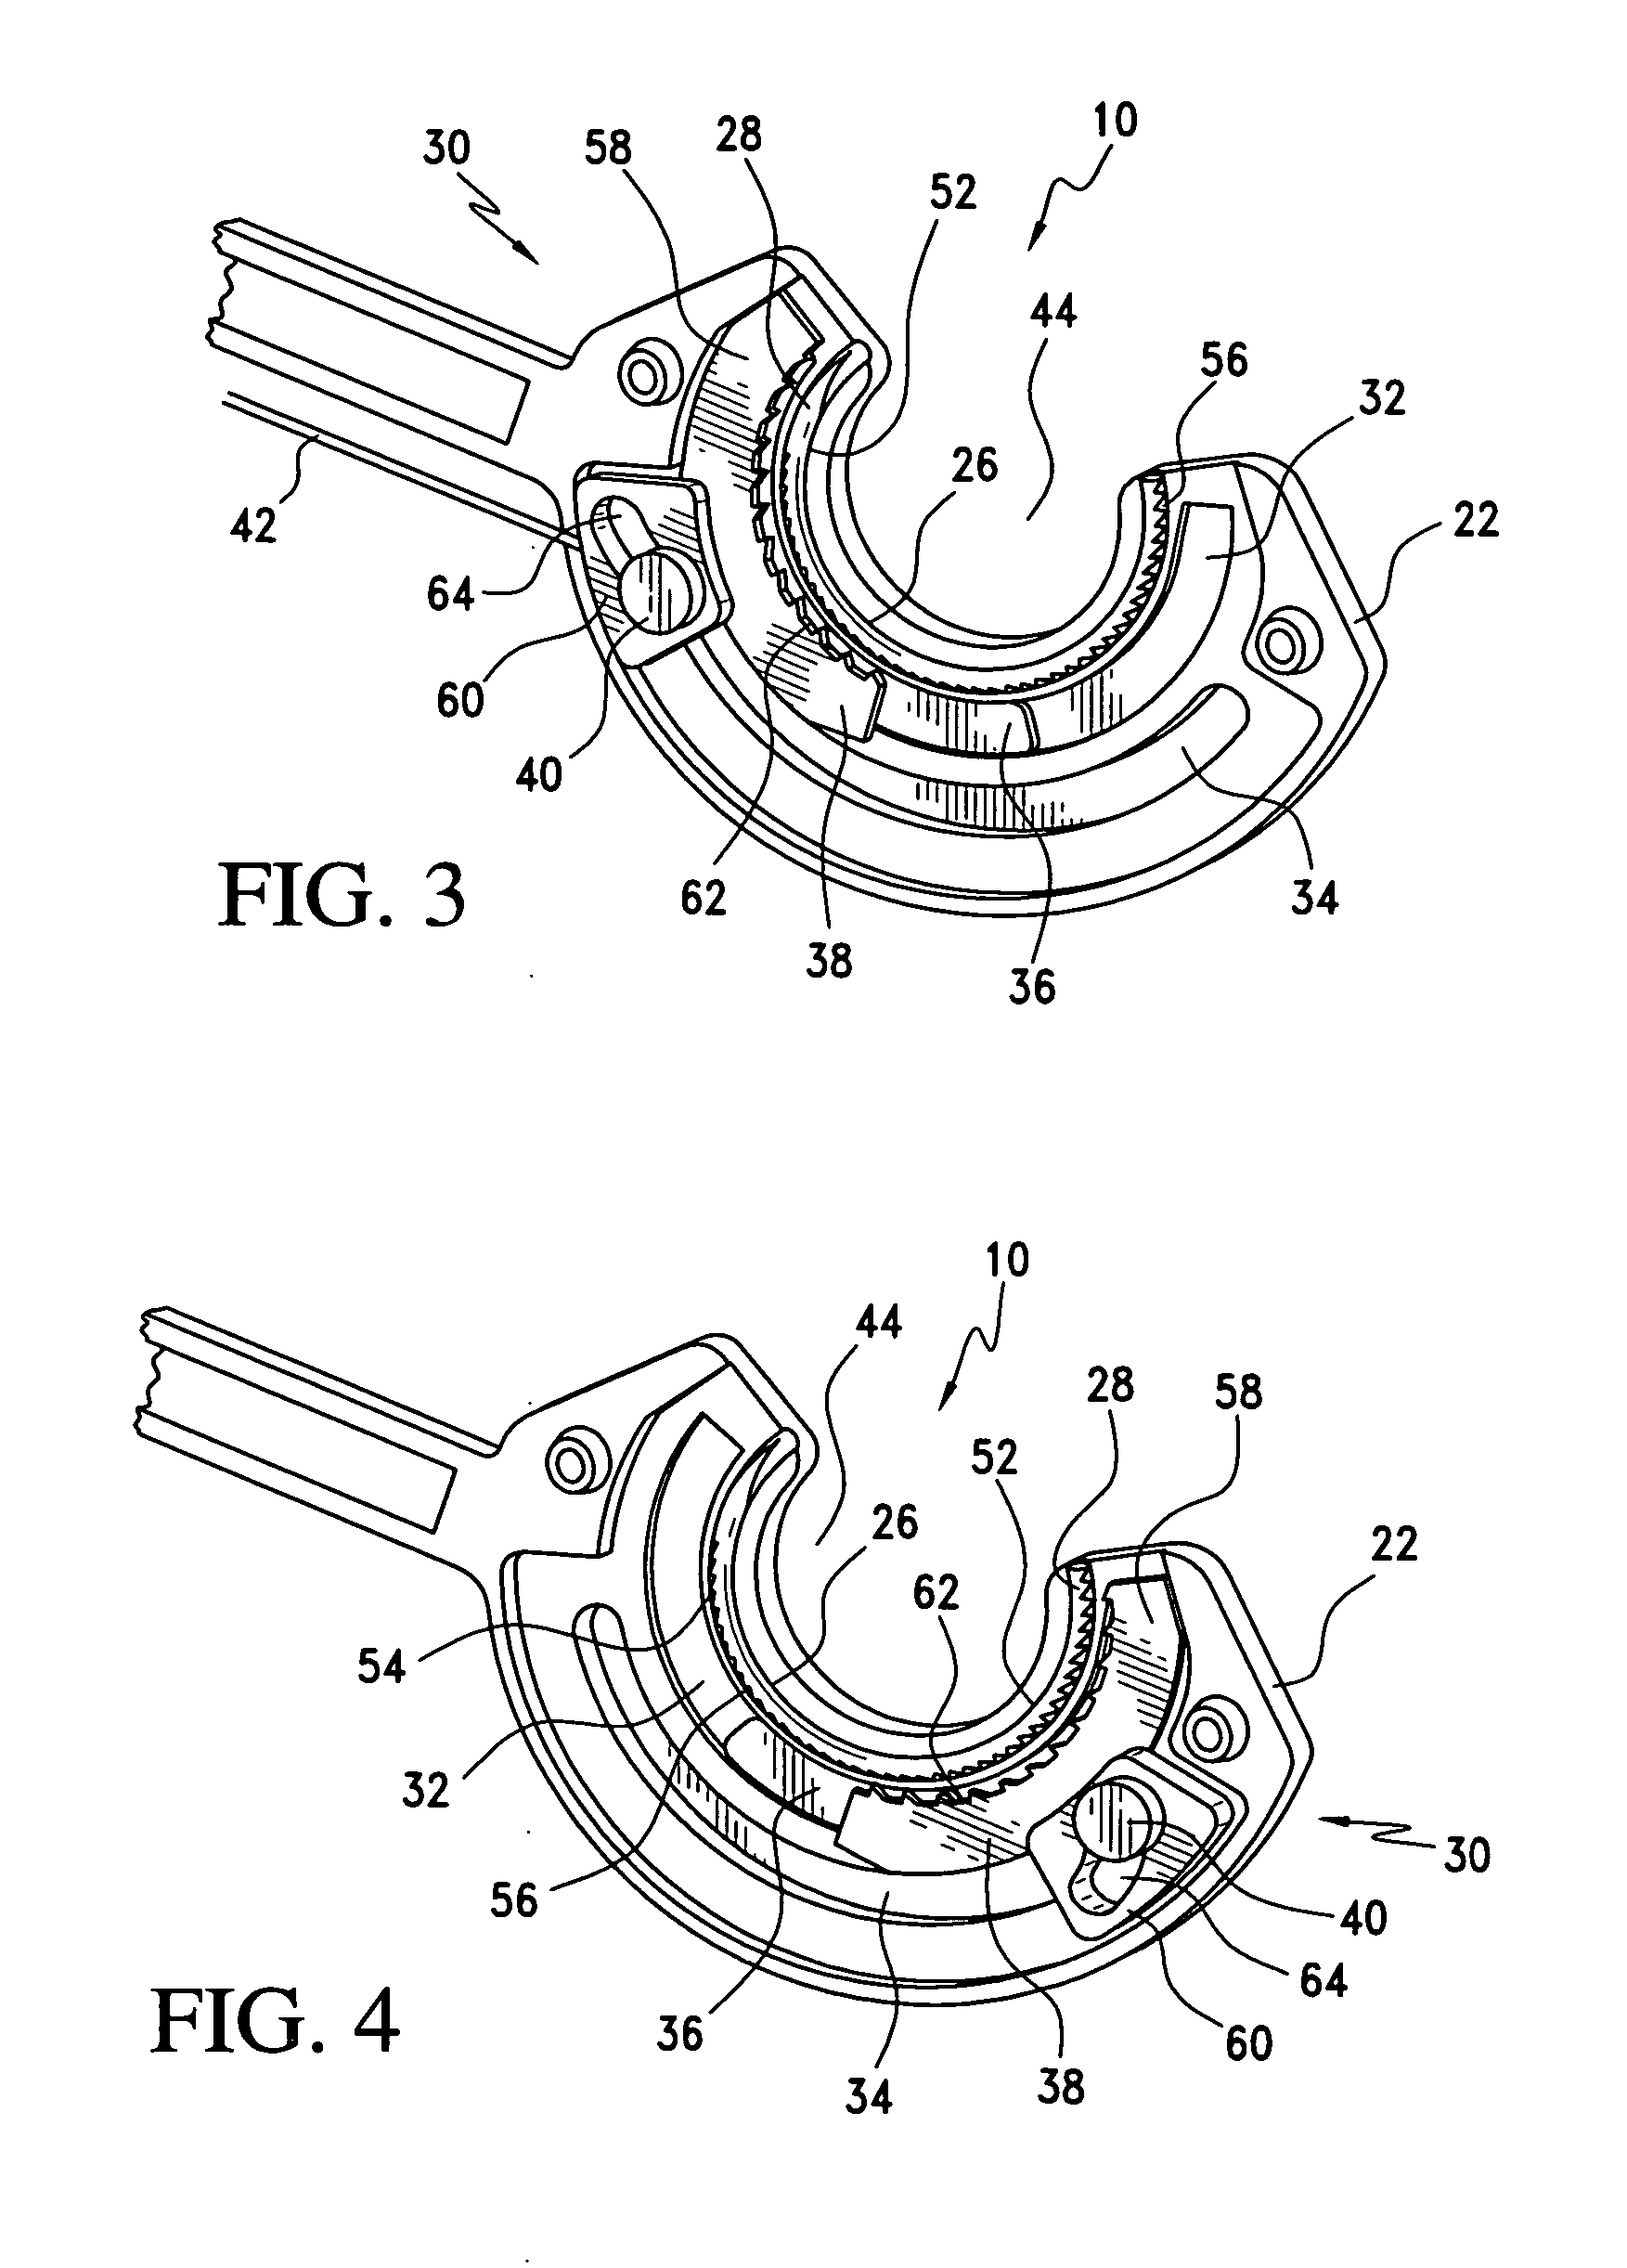 Surgical suturing apparatus with needle position indicator